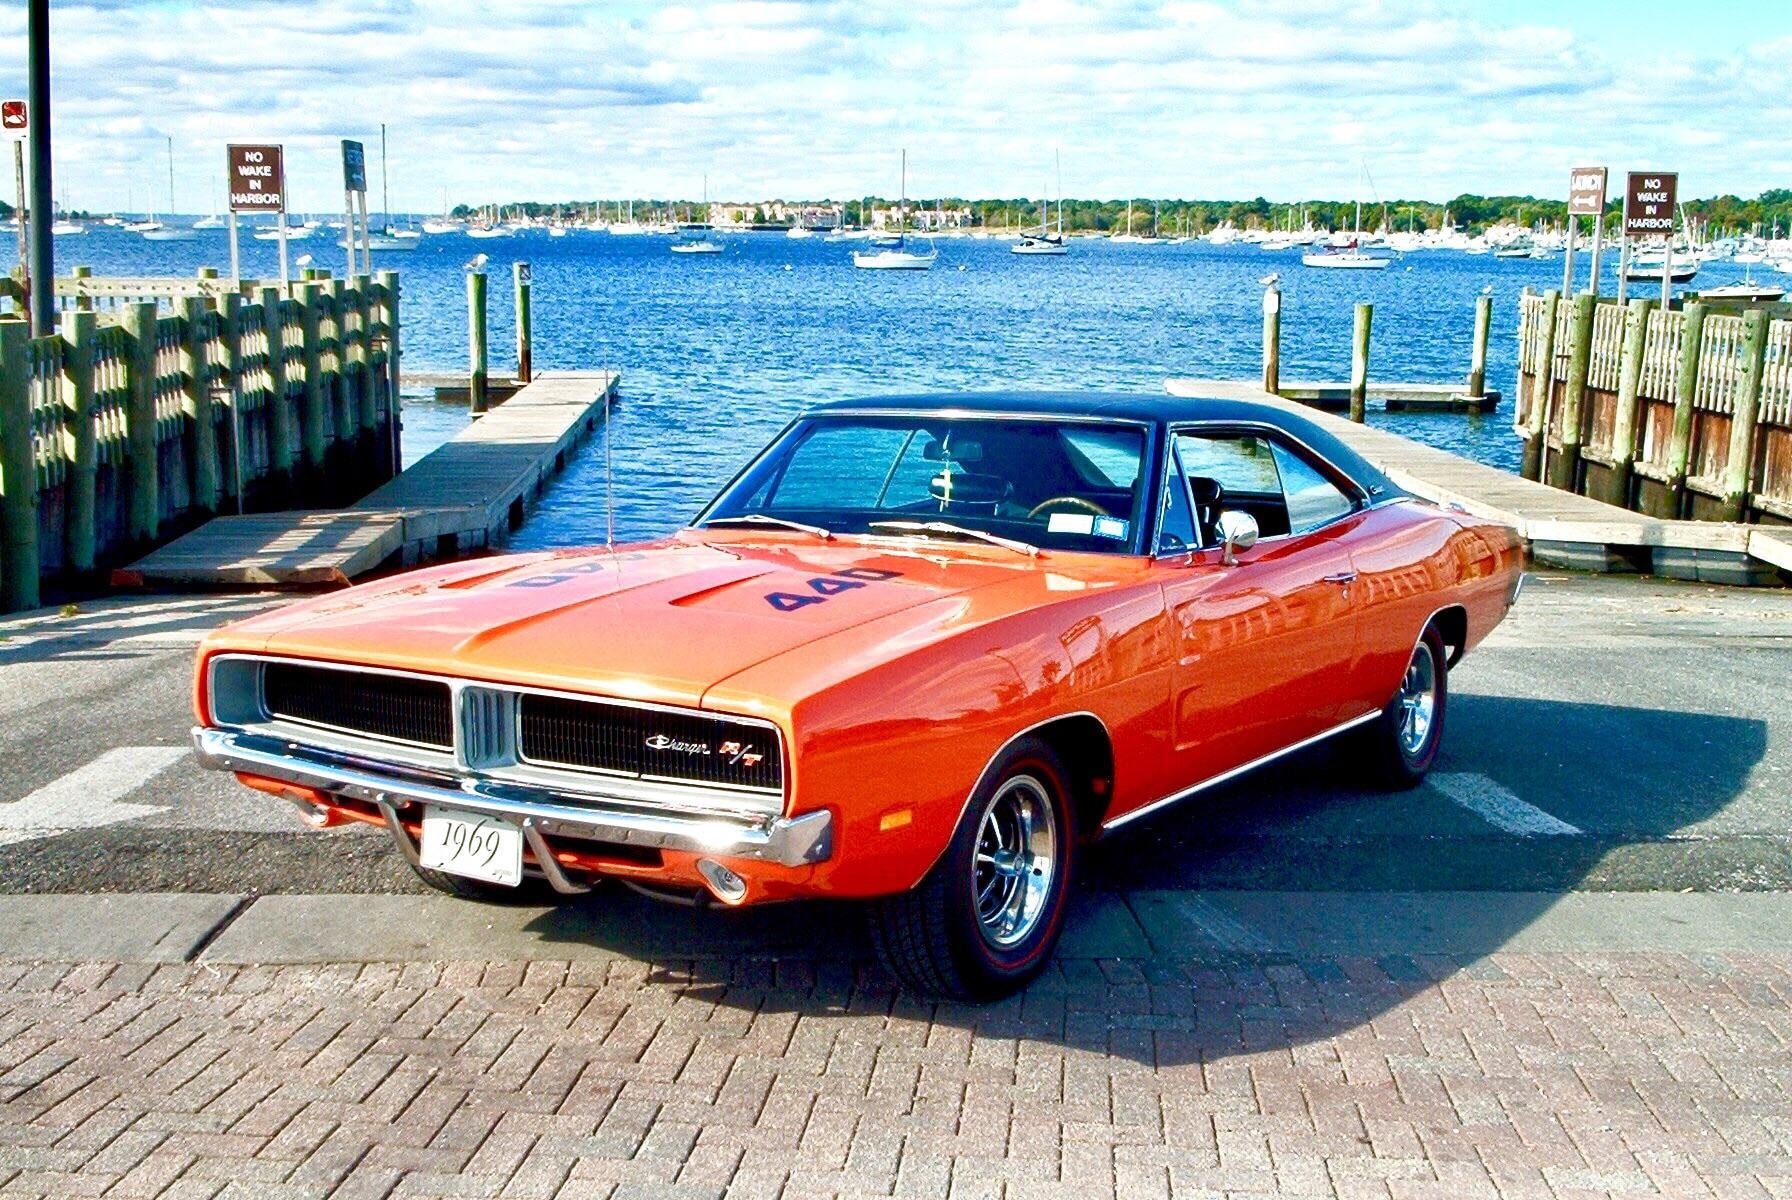 1969 Dodge Charger R/T 440 Magnum orange 24 X 36 Inch Poster - Etsy New  Zealand